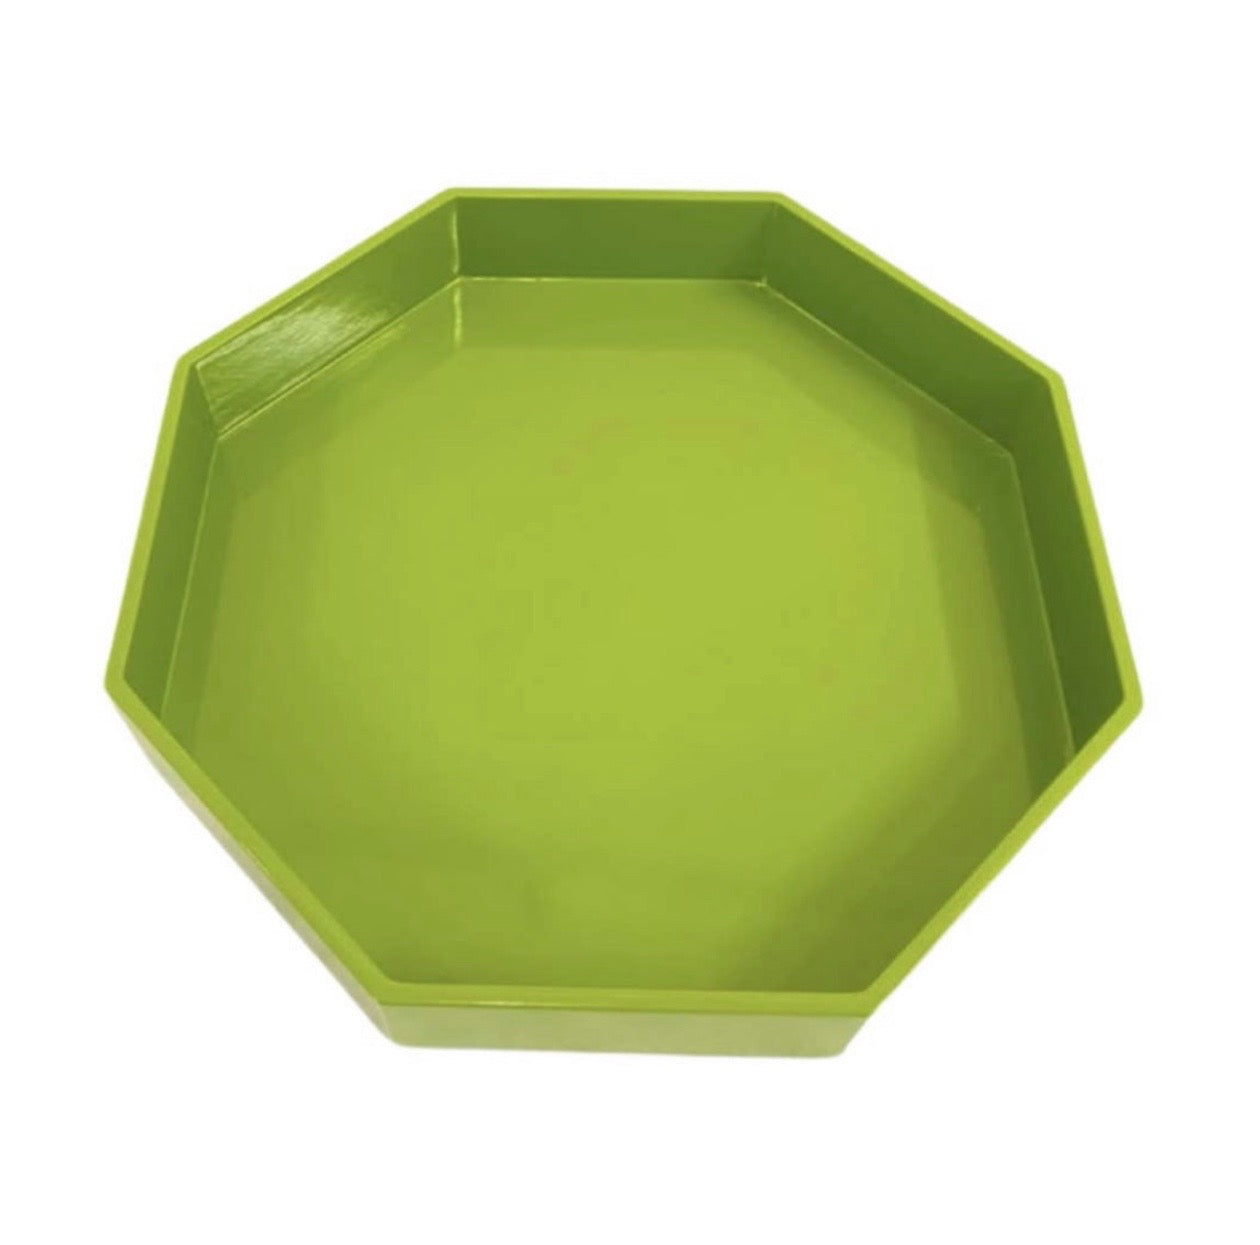 Small Octagonal Lacquered Tray, Parrot